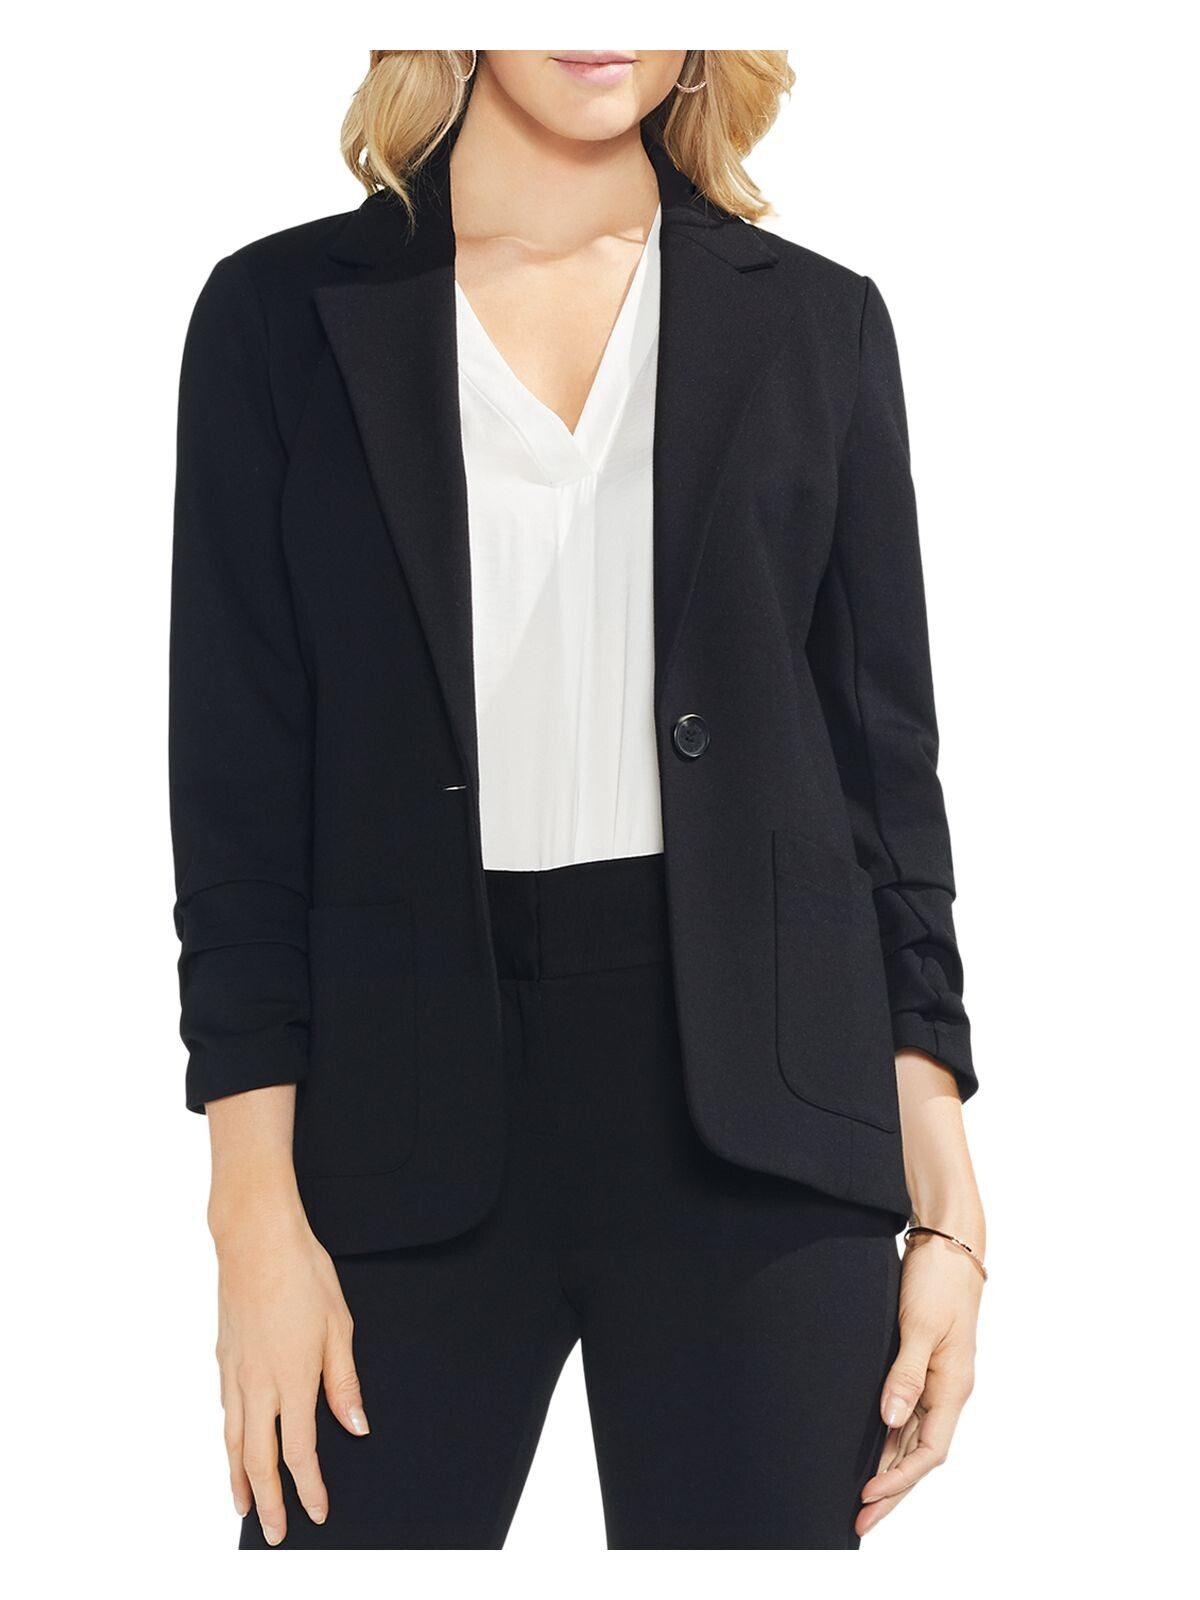 VINCE CAMUTO Womens Black Pocketed Ruched 3/4 Sleeve Notched Collar Button Wear To Work Blazer Jacket XL